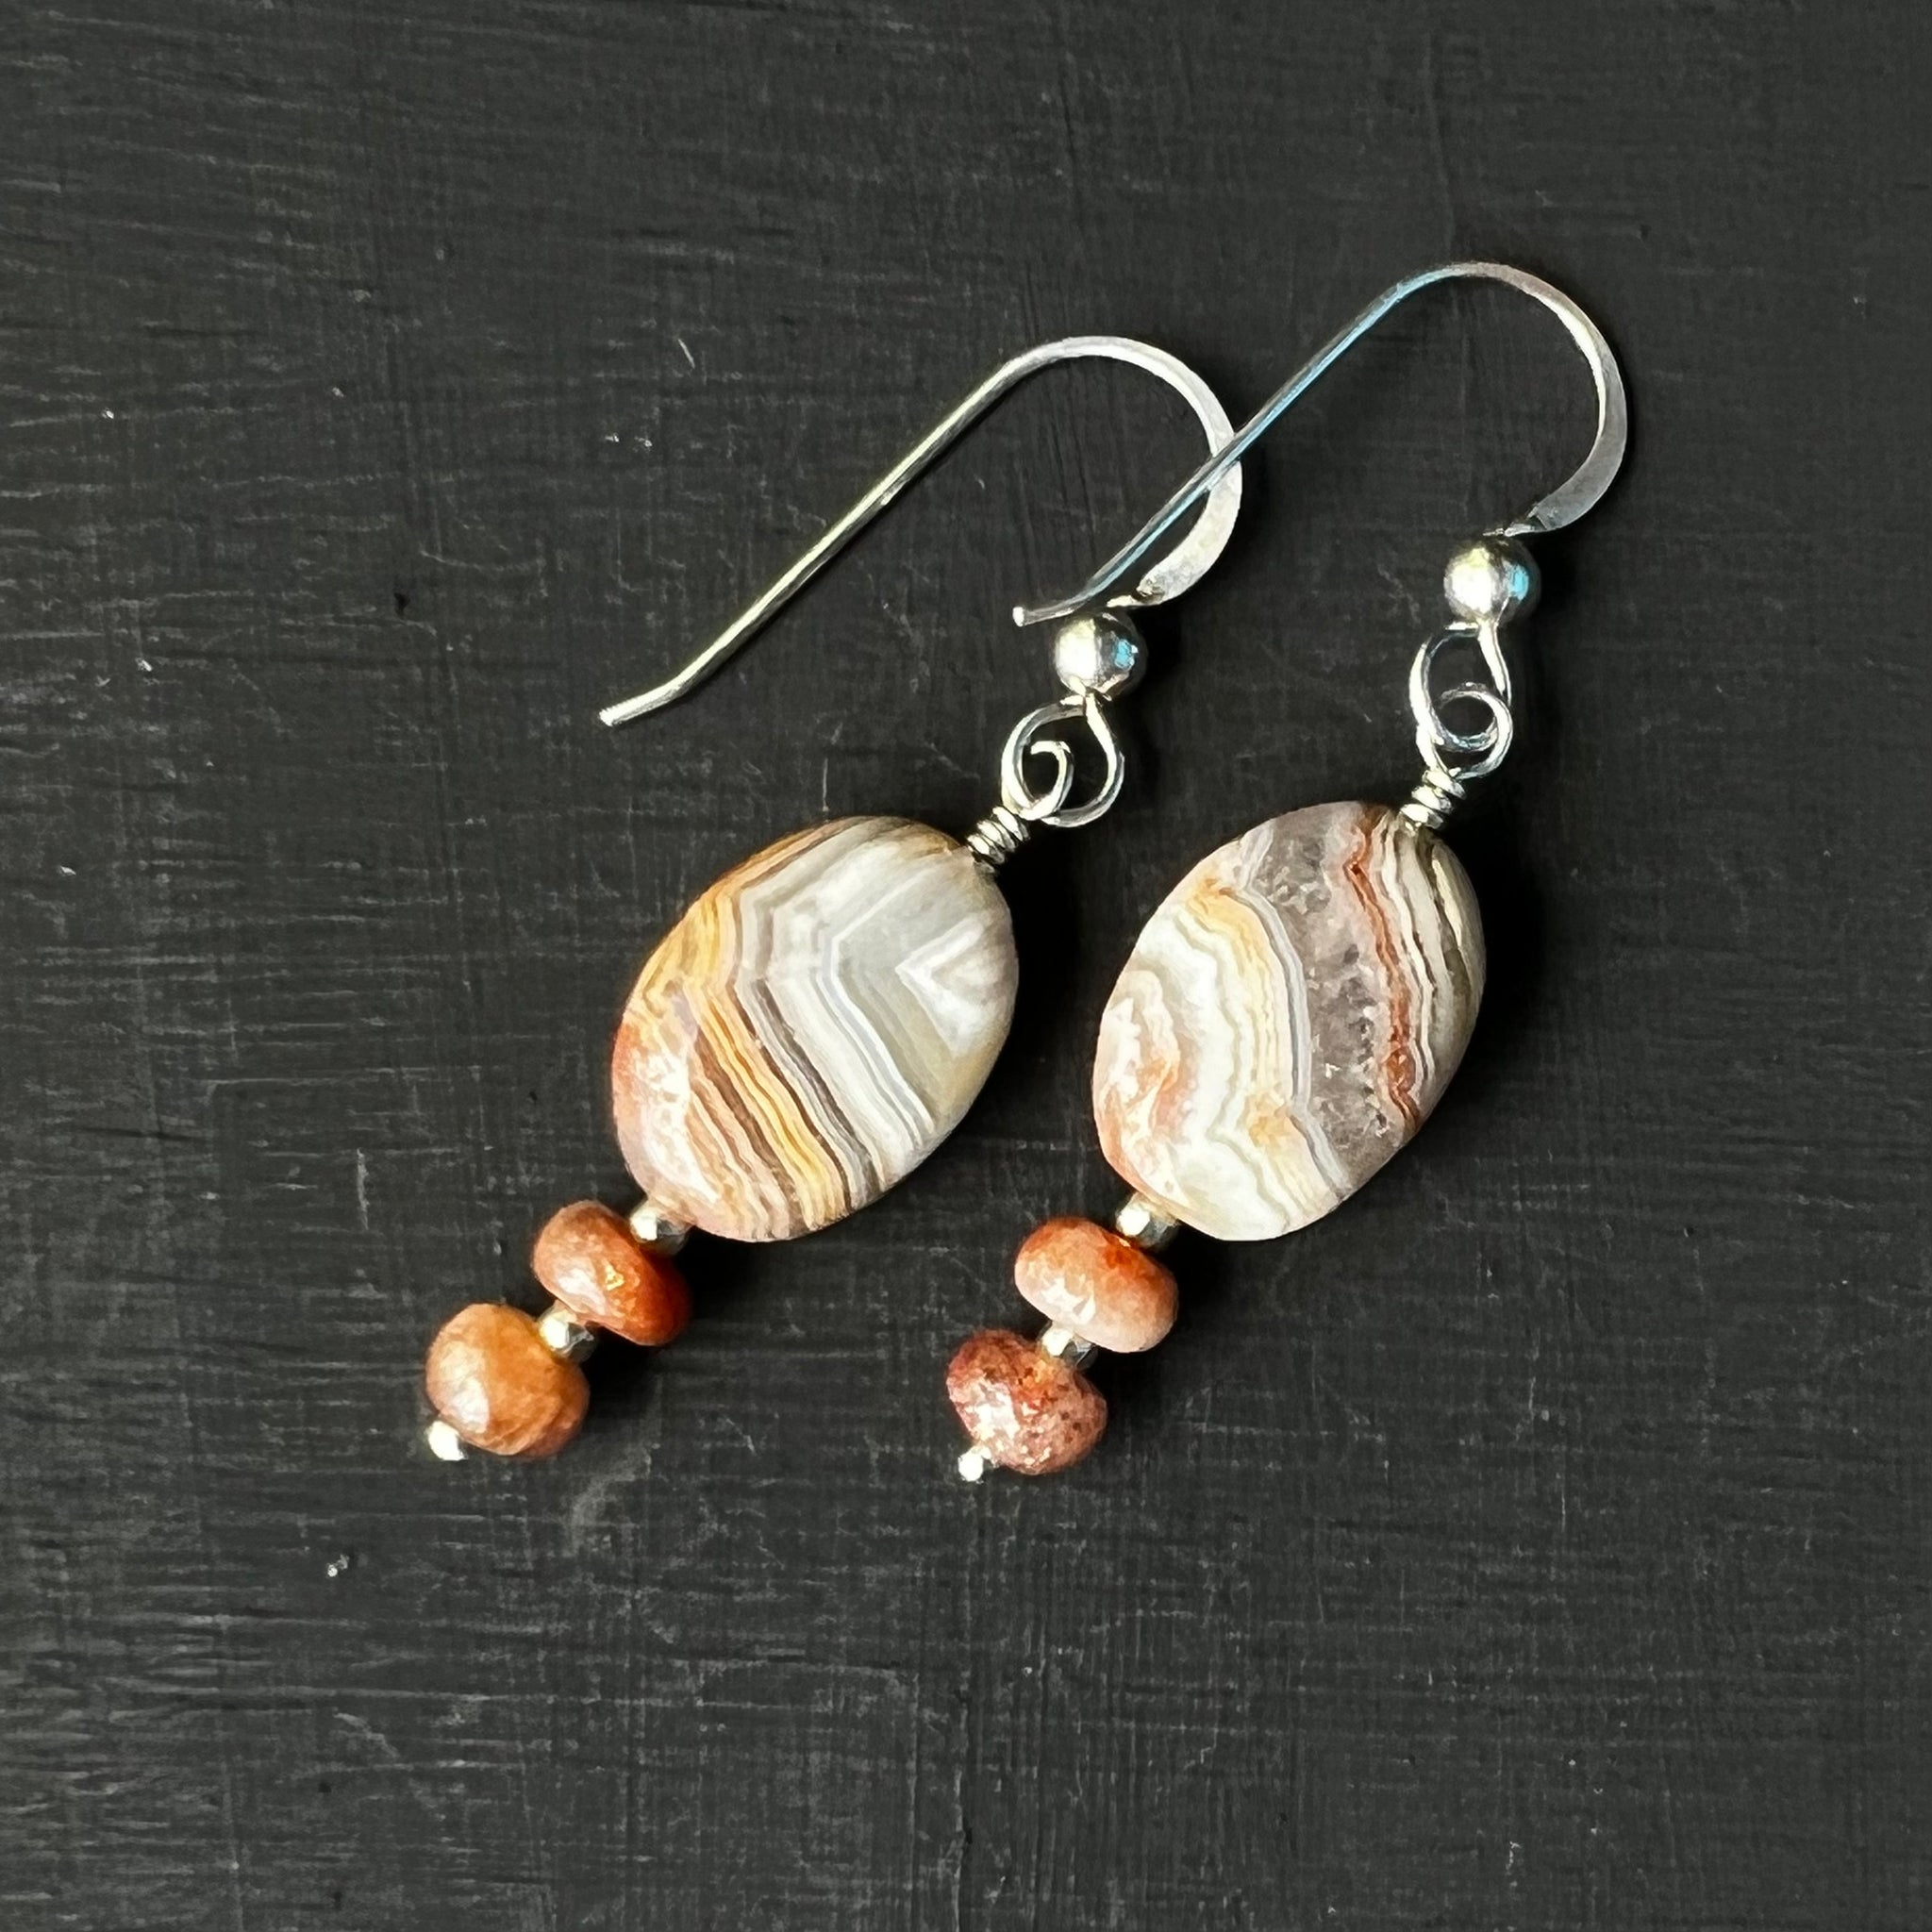 Crazy Lace Agate and Sunstone earrings